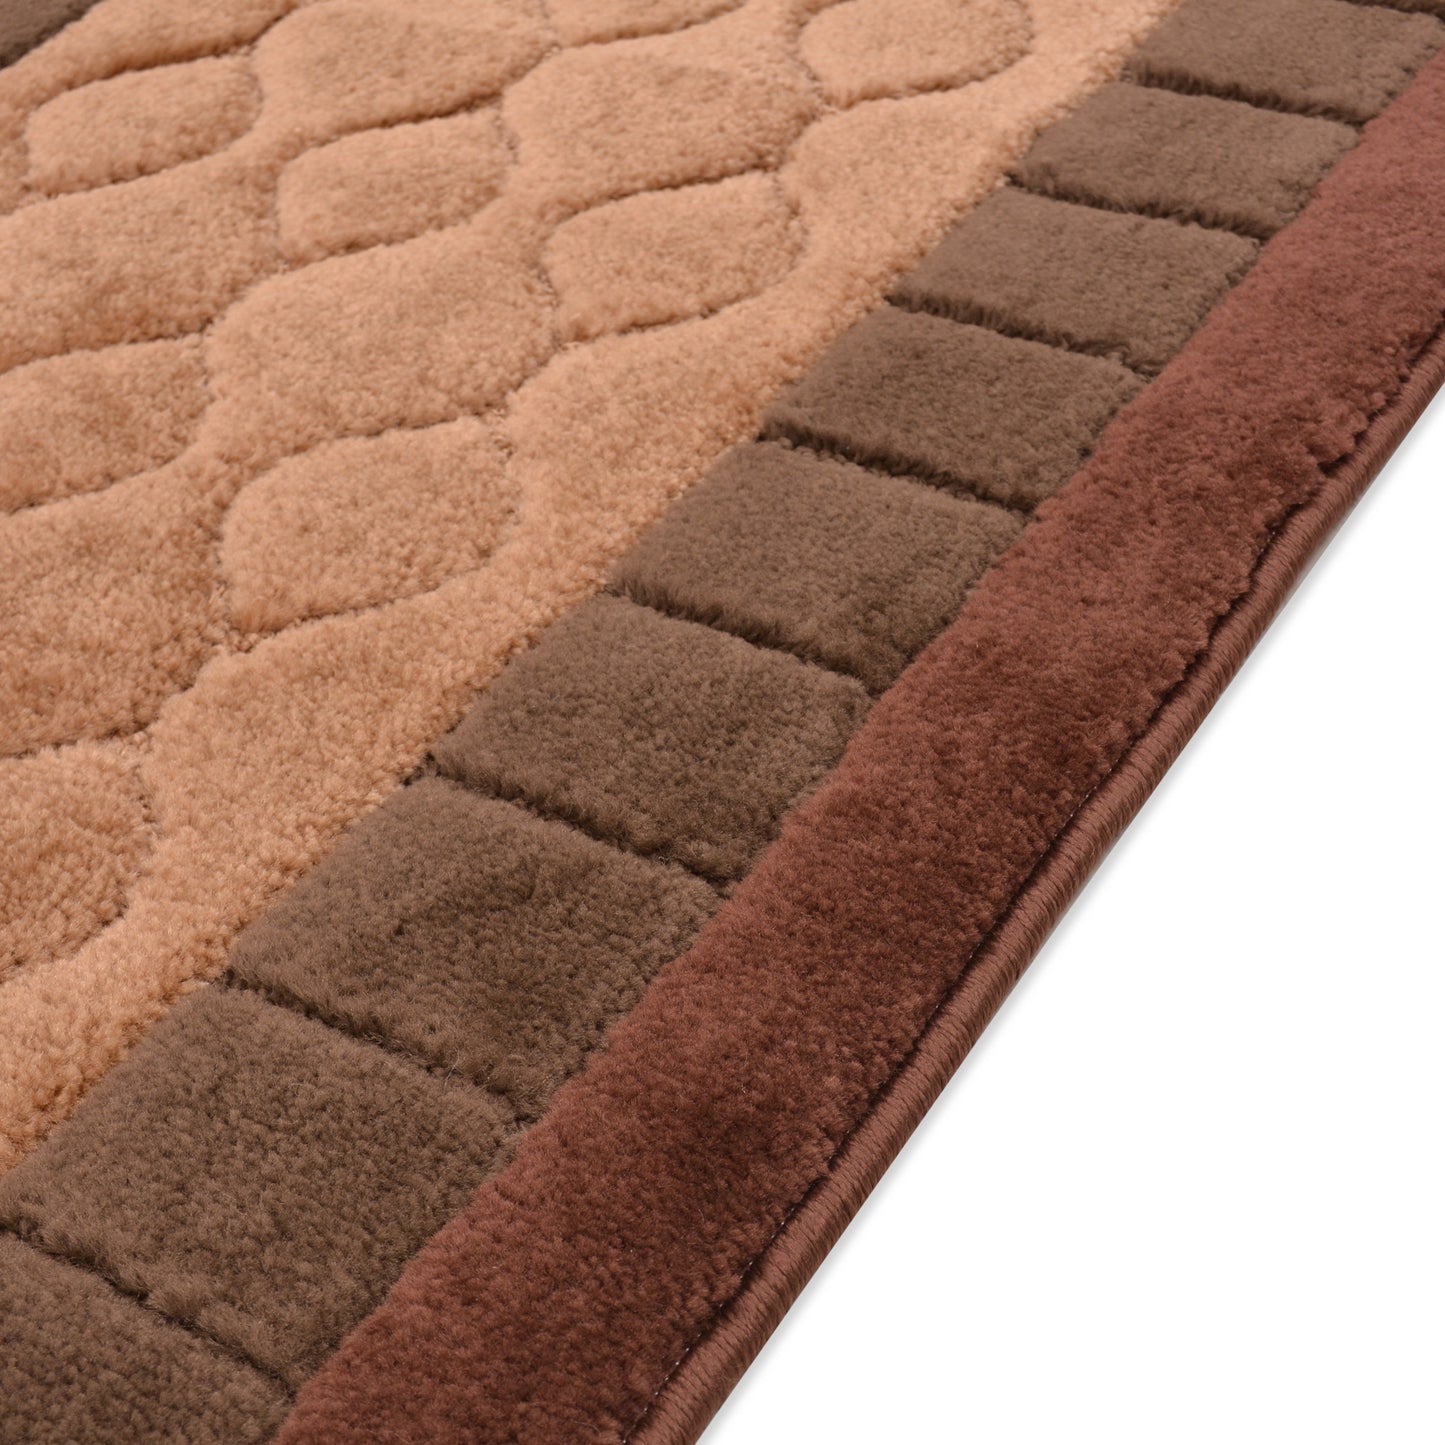 Custom Size Runner Rug Volley Circle Beige-Brown Color Skid Resistant Rug Runner Customize Up to 50 Feet and 26 Inch Width Cut to Size Rugs